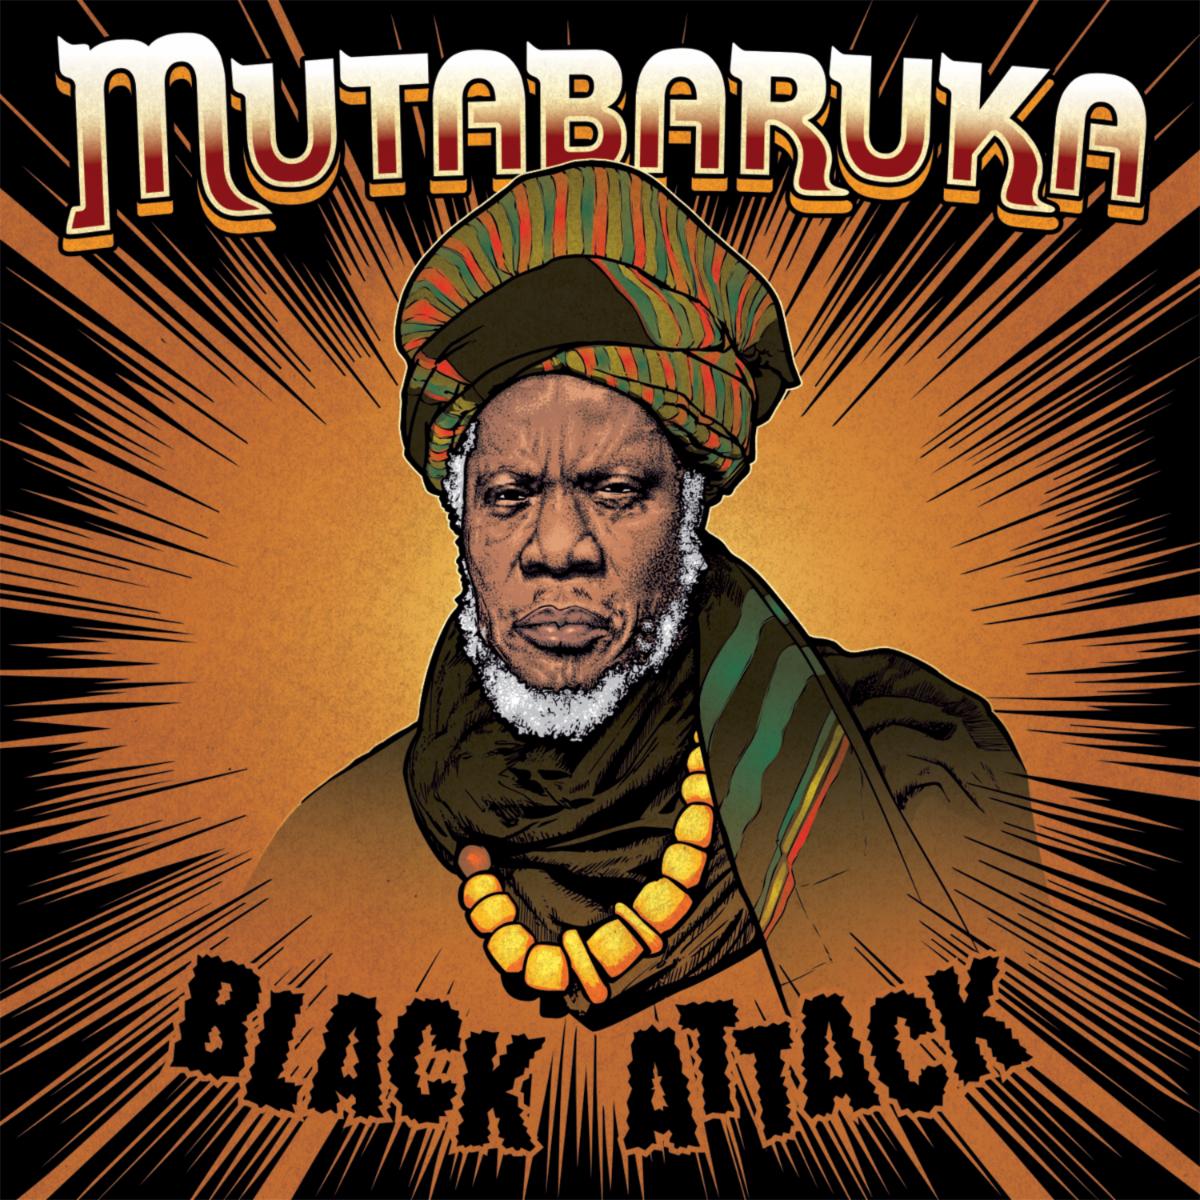 Iconic Dub Poet Mutabaruka ‘Black Attack’ Out Now